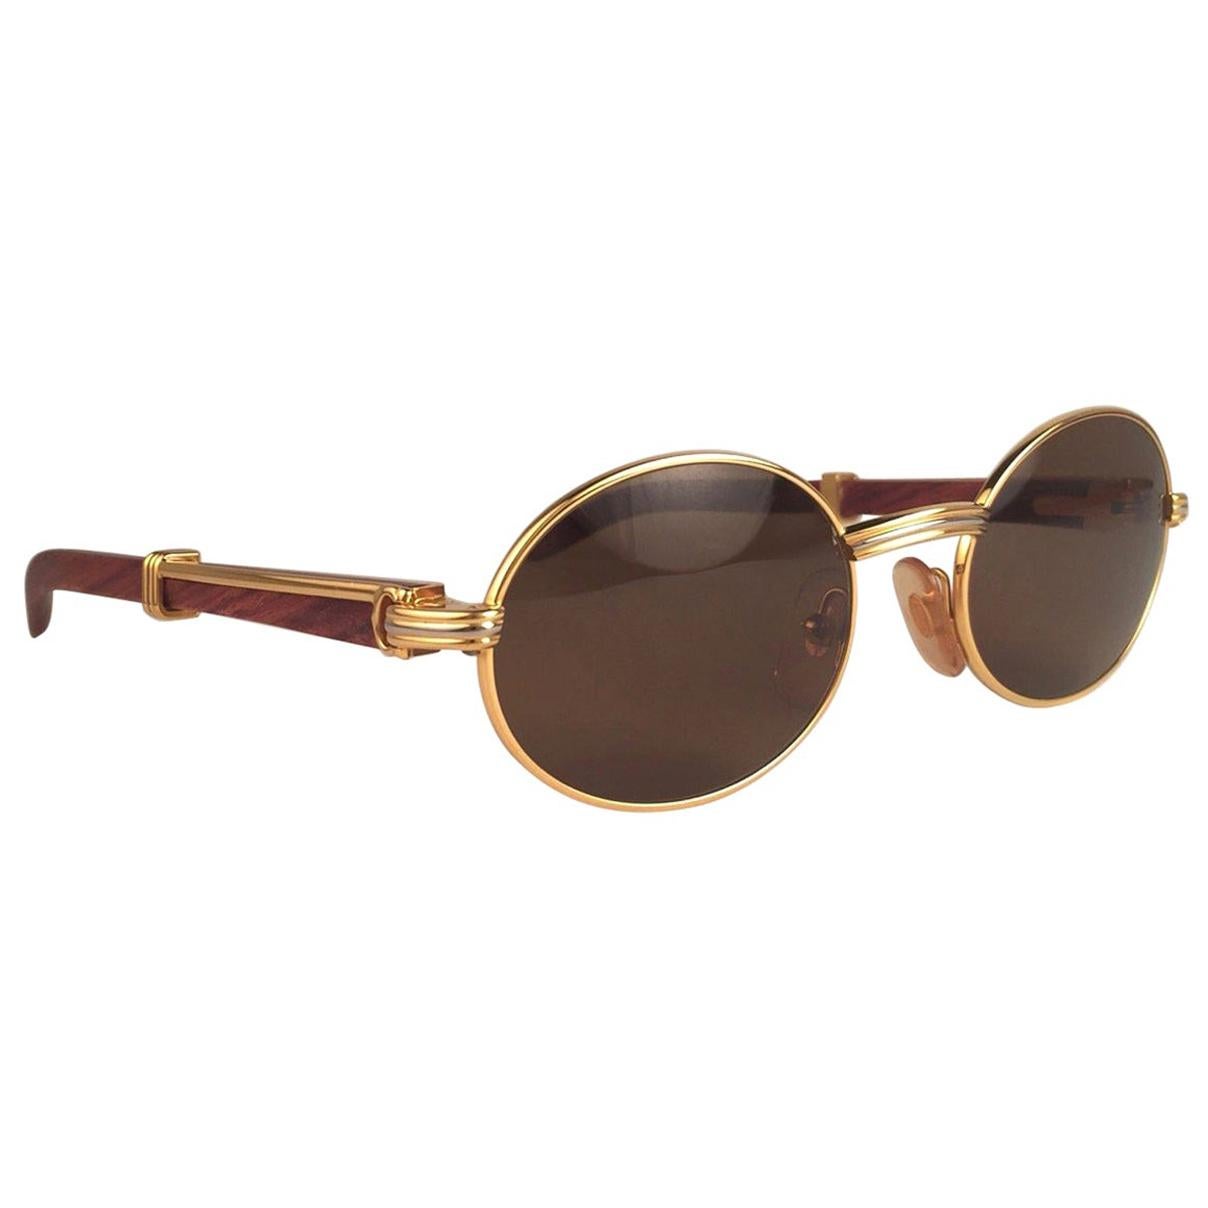 New Original Rare Yellow and White Gold 1992 Cartier classy Giverny Sunglasses with rosewood temples and honey brown spotless uv protection lenses.  
Frame with the front and sides in yellow gold.  
All hallmarks.  Gold Cartier signs on the ear